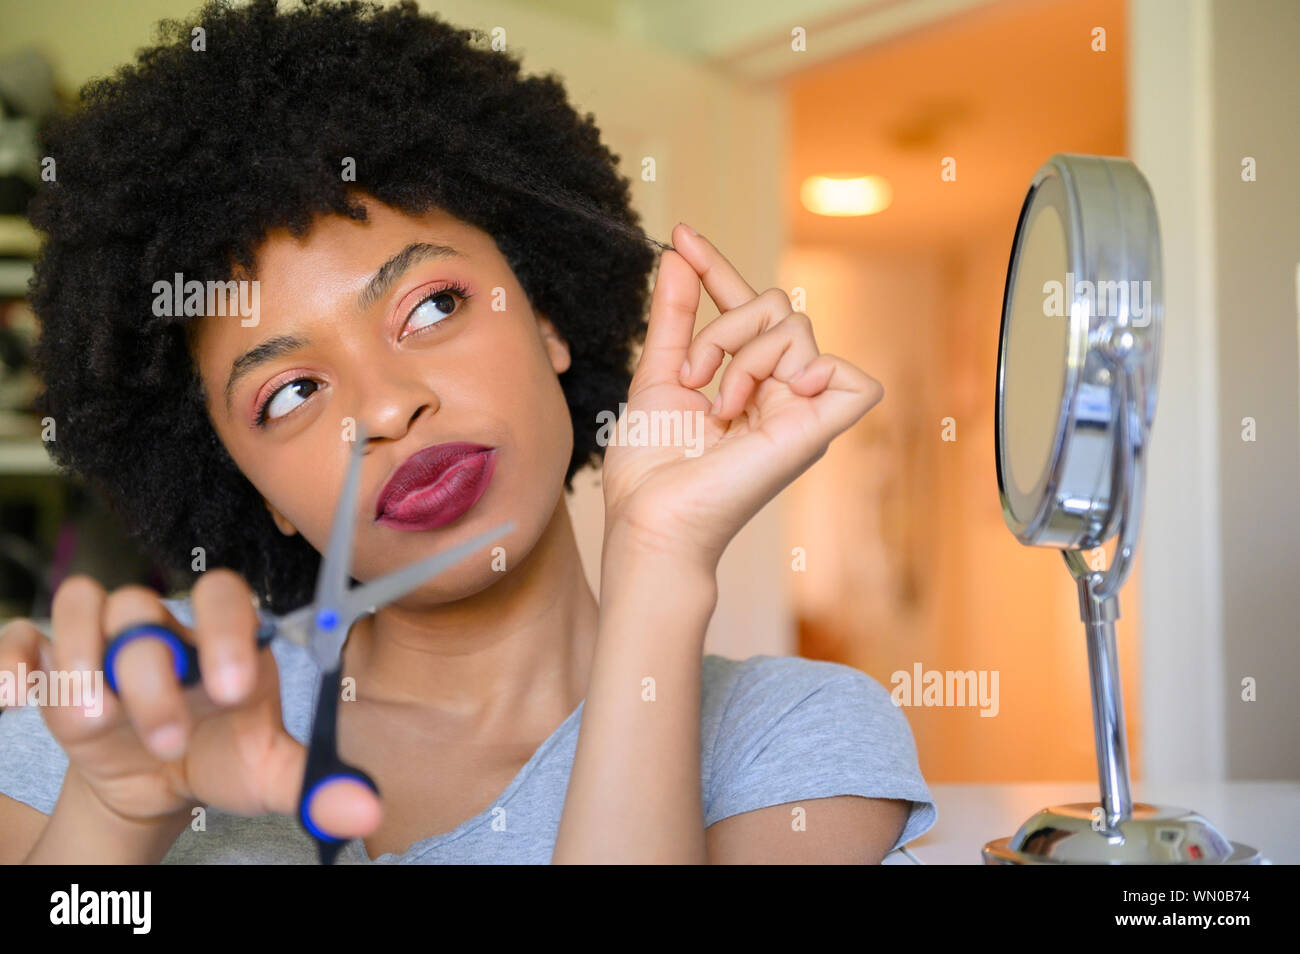 Young woman contemplating cutting her hair Stock Photo